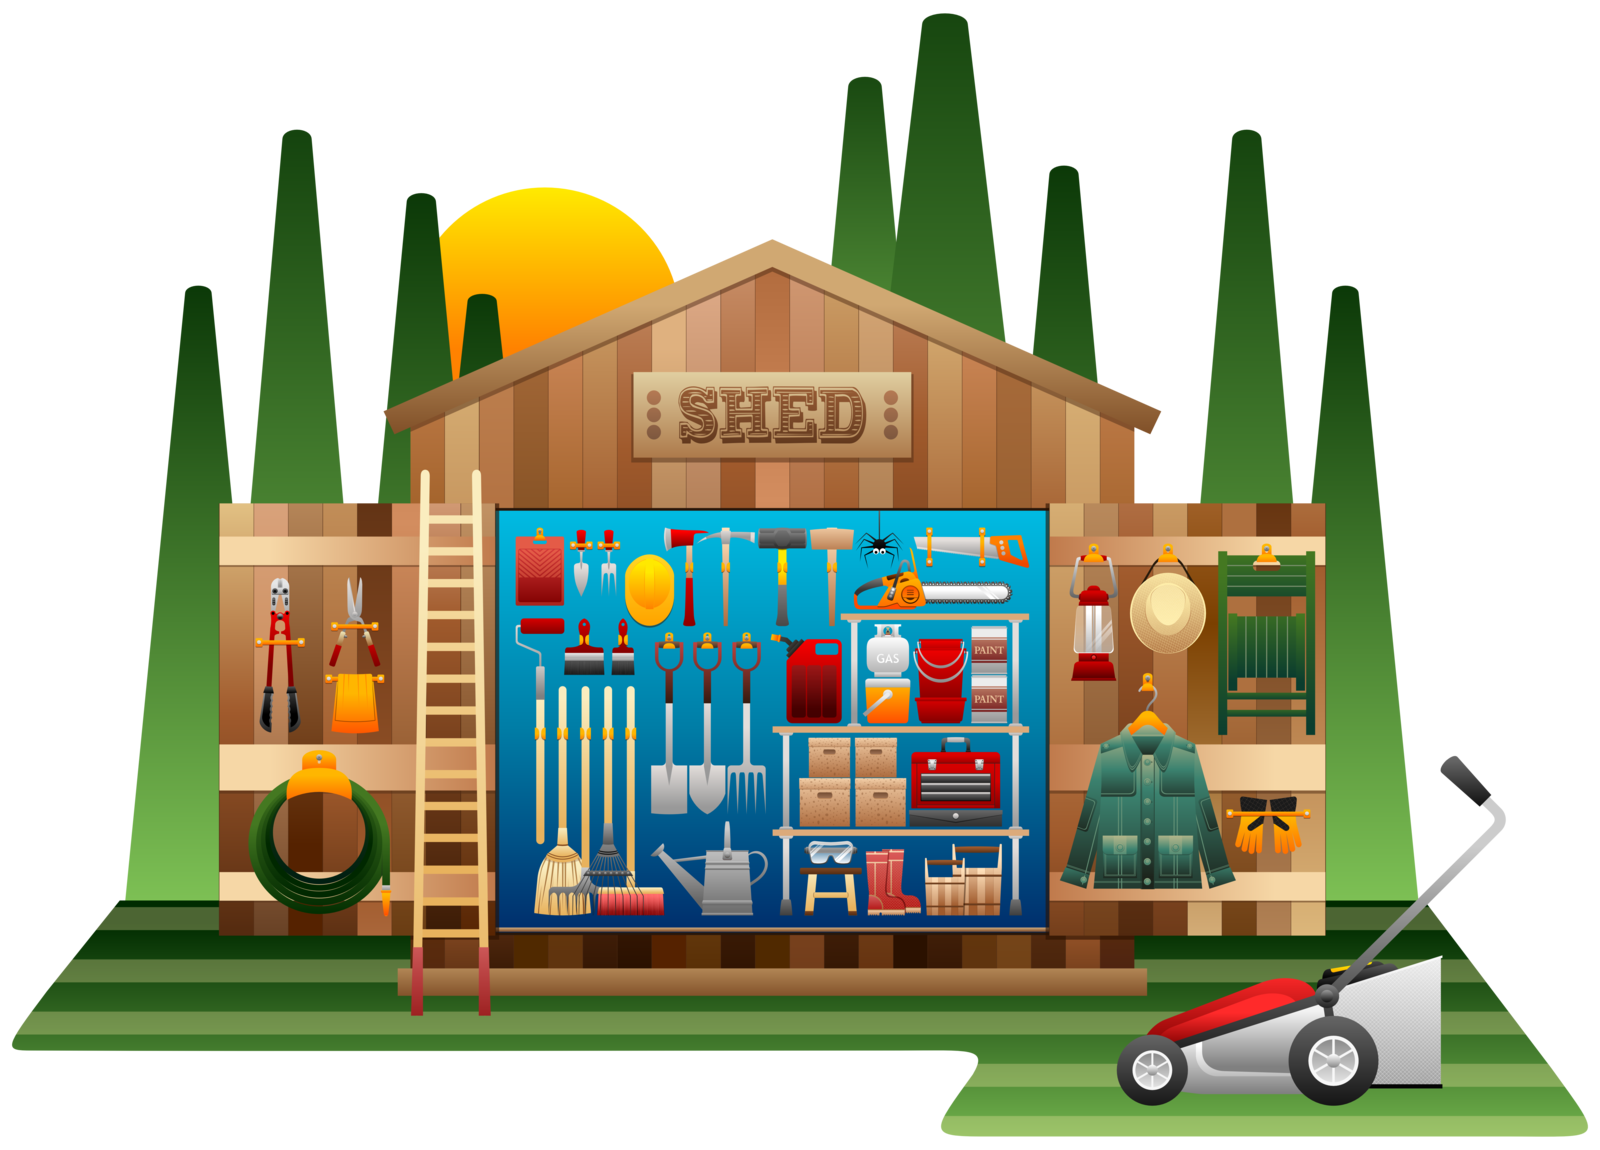 Shed by Viscious-Speed on deviantART